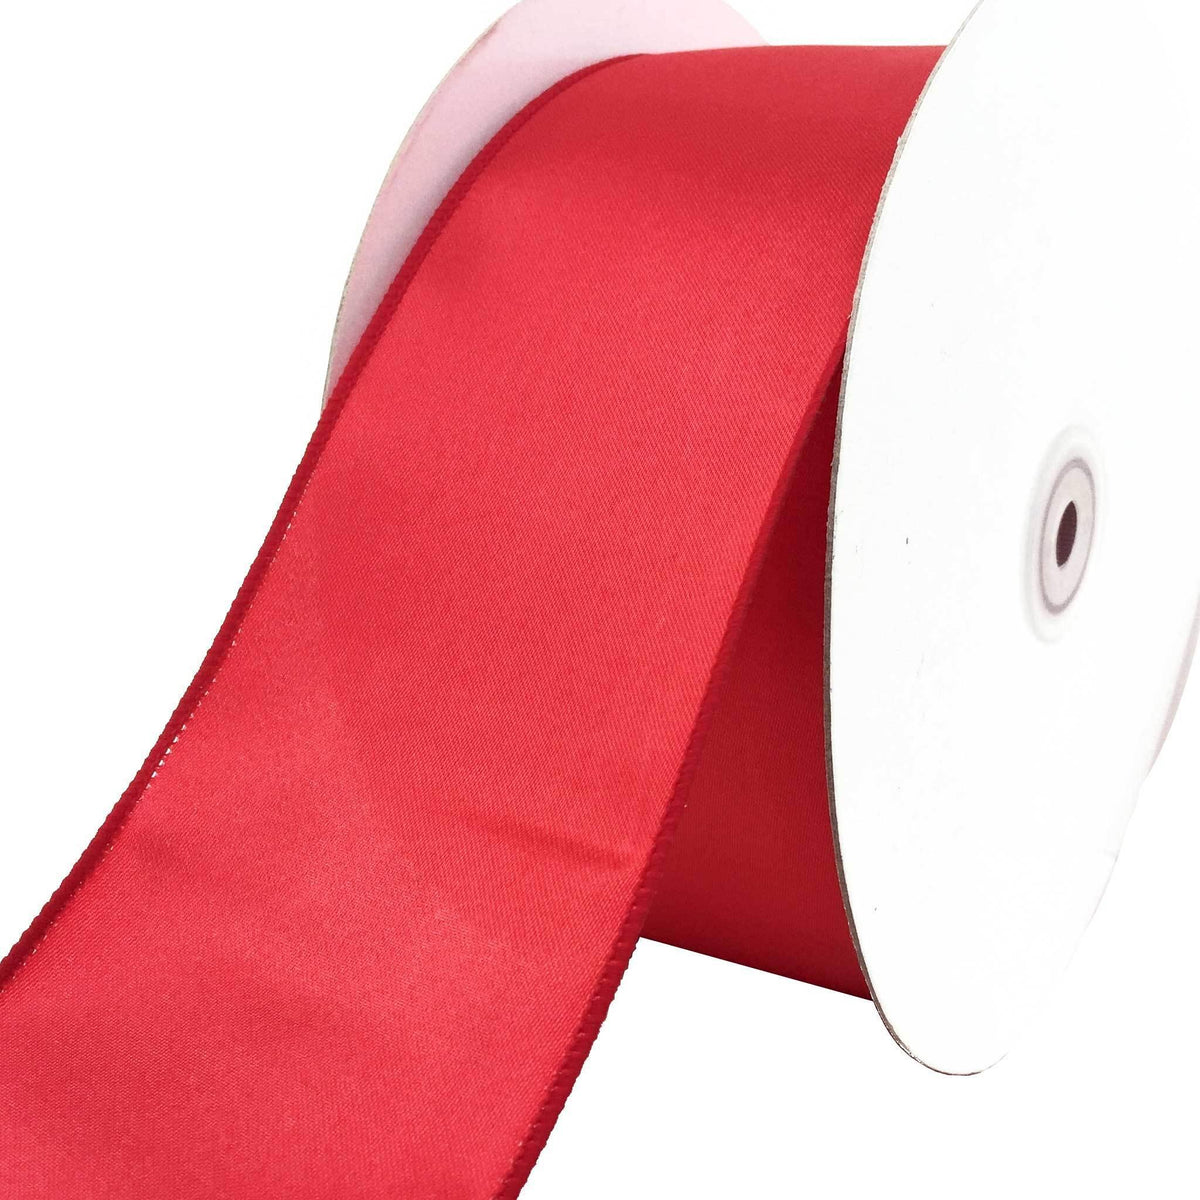 Lee Display's roll of Red Bengaline Christmas Ribbon with a Wired-Edge on sale at leedisplay.com